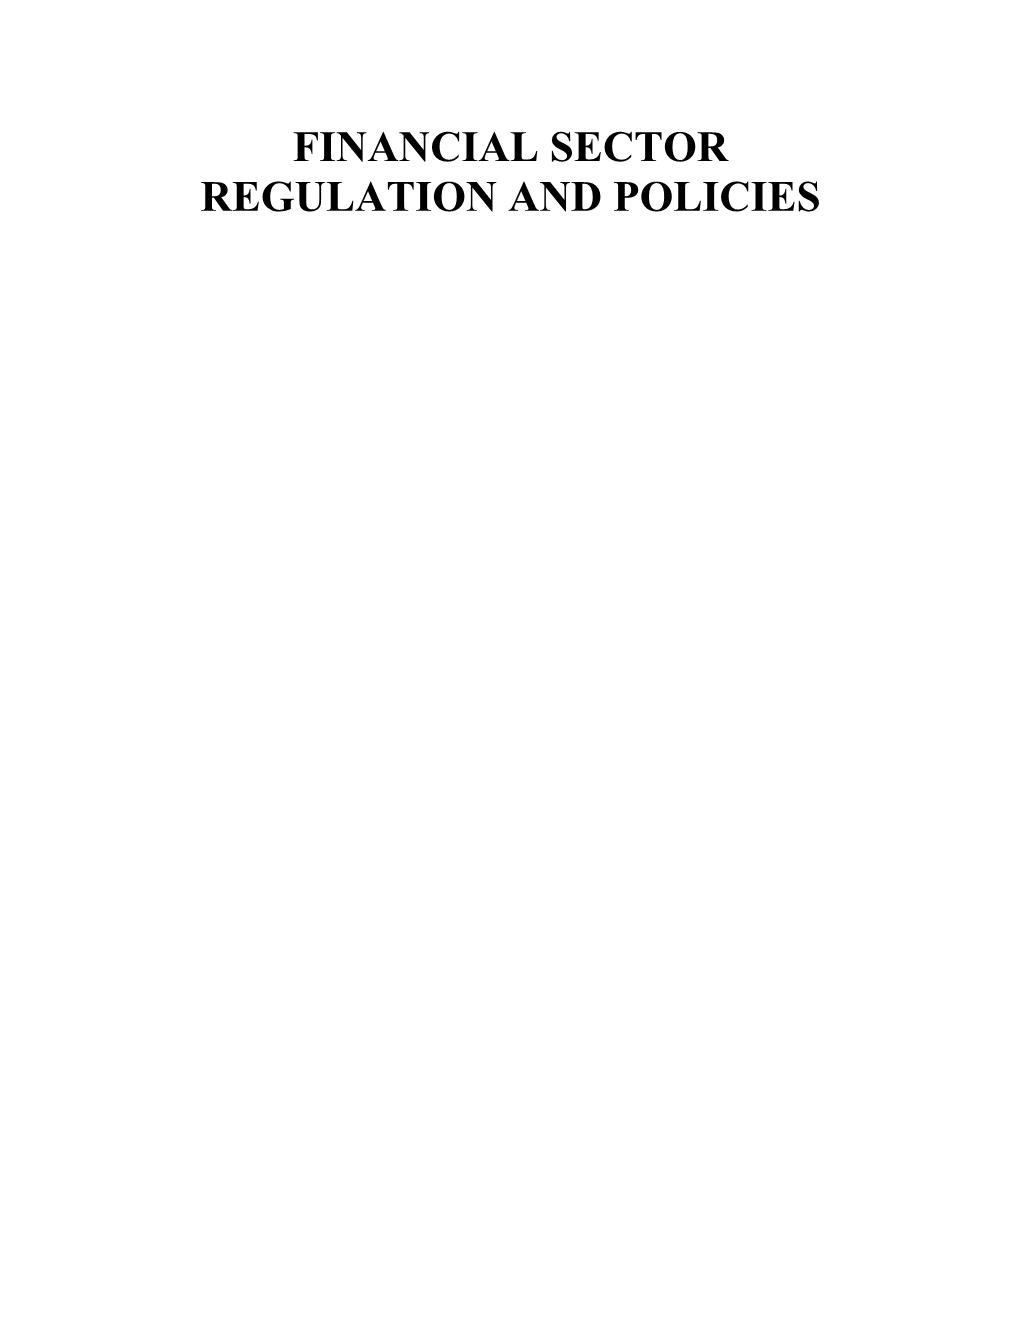 Financial Sector Regulation and Policies Financial Sector Regulation and Policies